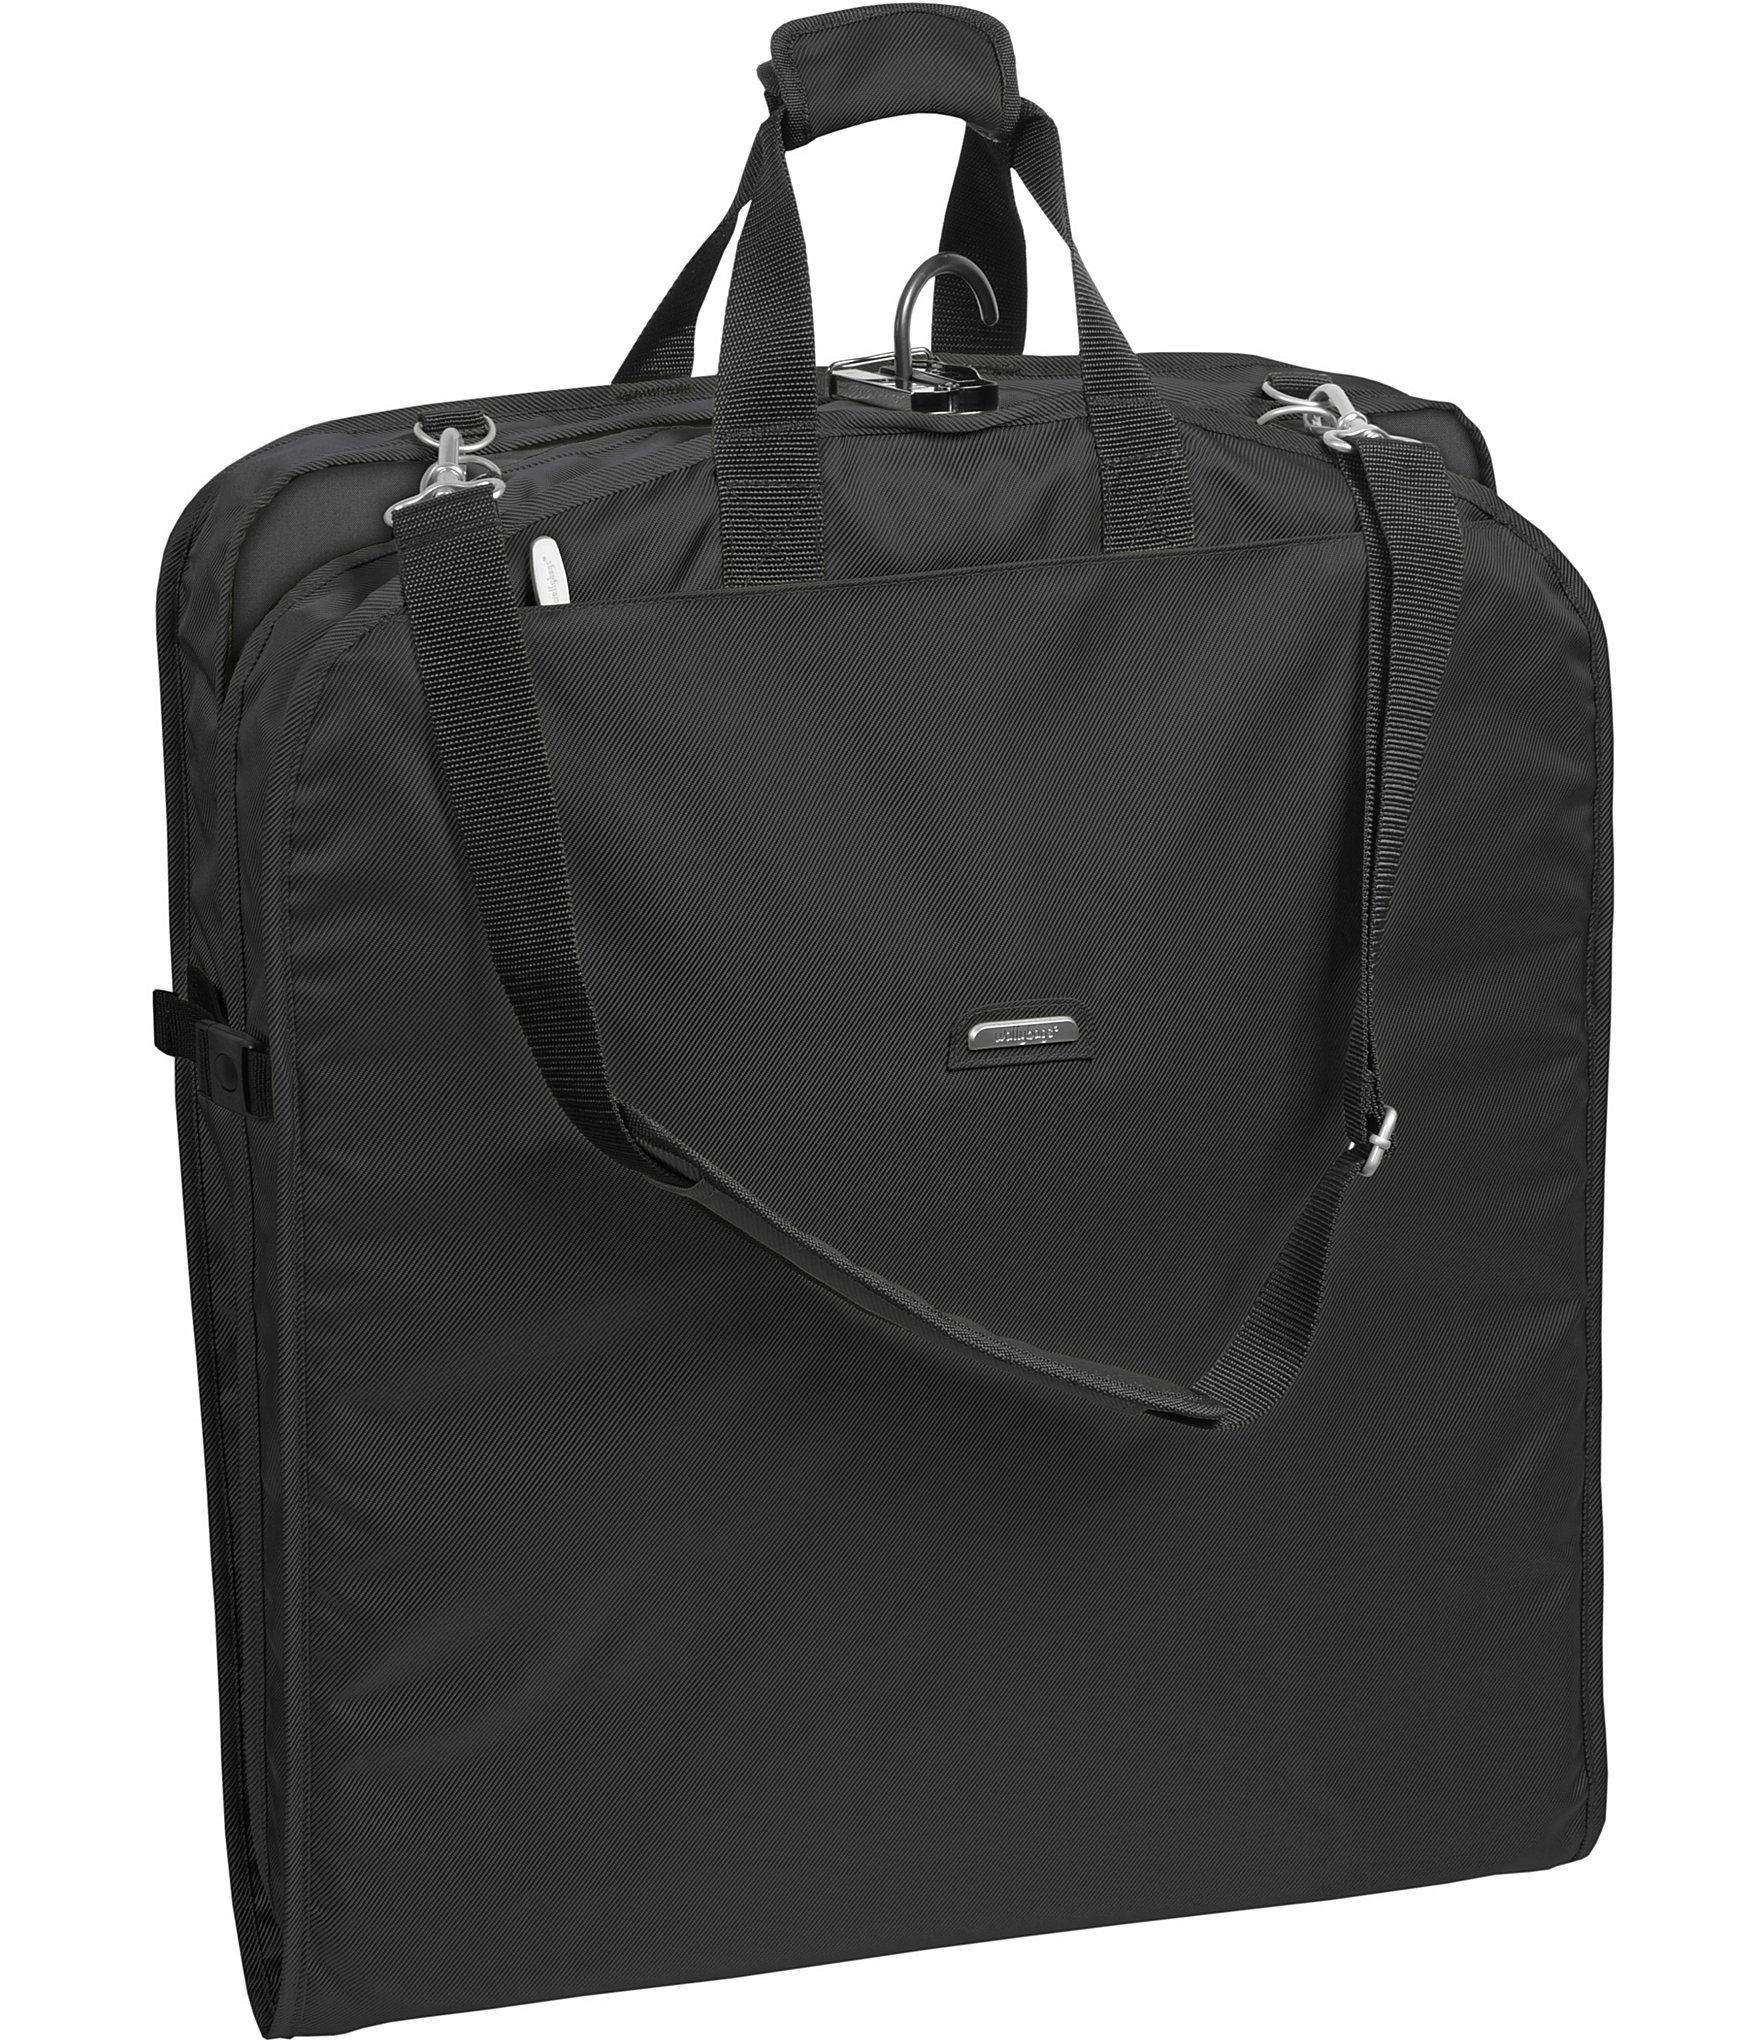 Wallybags 45 Premium Rolling Garment Bag With Multiple Pockets Black   Target